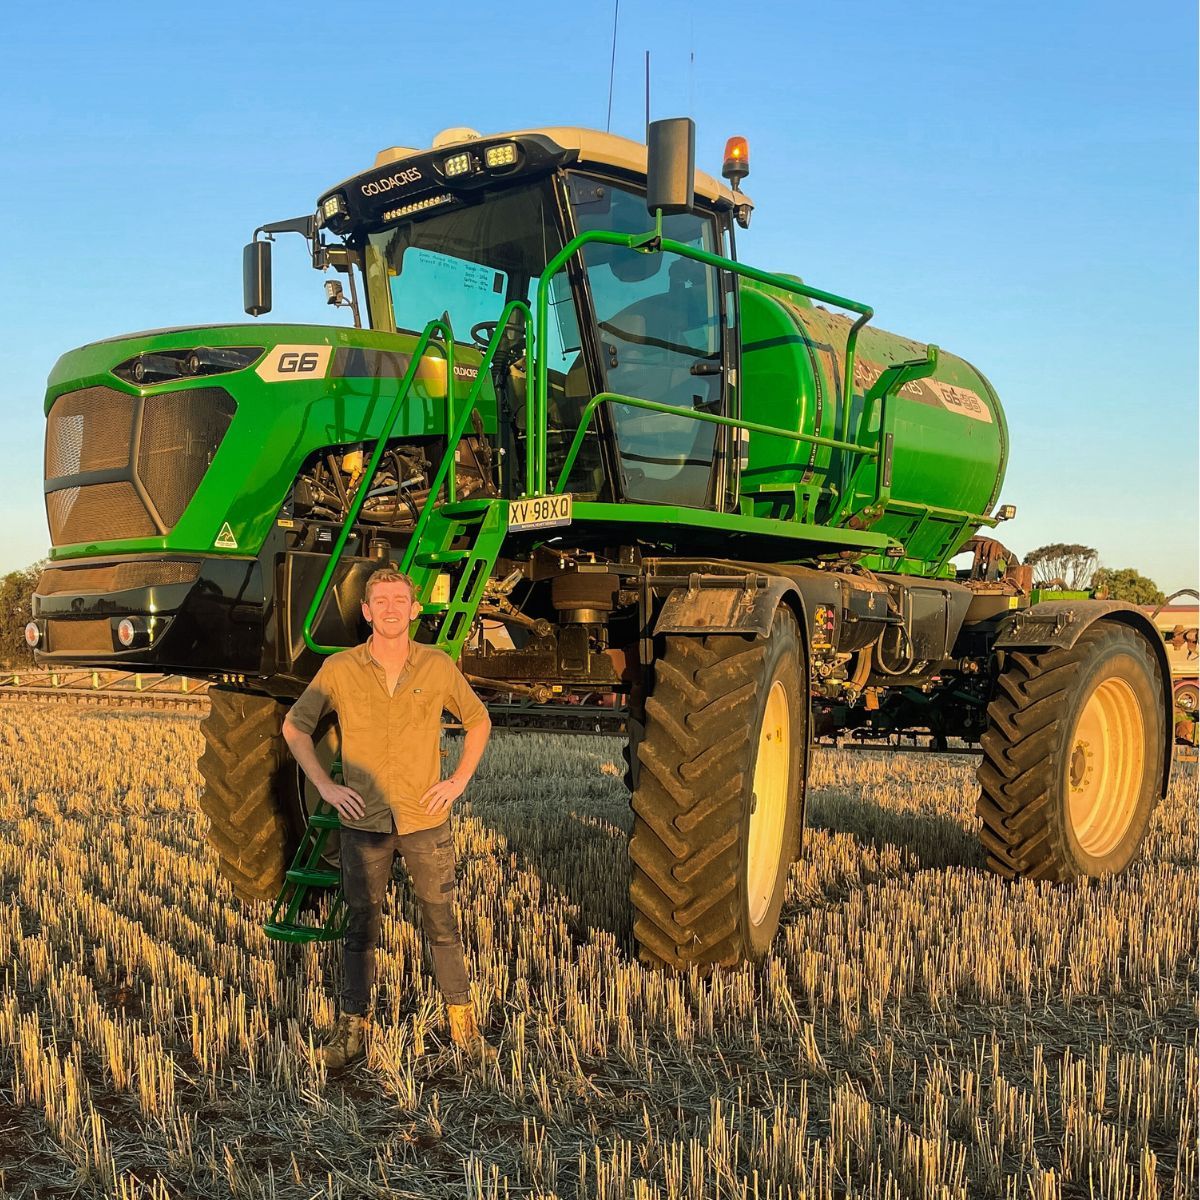 🚜 Farmer in Focus: Lachy McClelland 'We’ve stayed busy carting grain from the 2023 season, renovating sprayer wheels tracks, removing fences, and completing maintenance required on the seeder for the season ahead.' Read the full interview here: buff.ly/3wfylEz